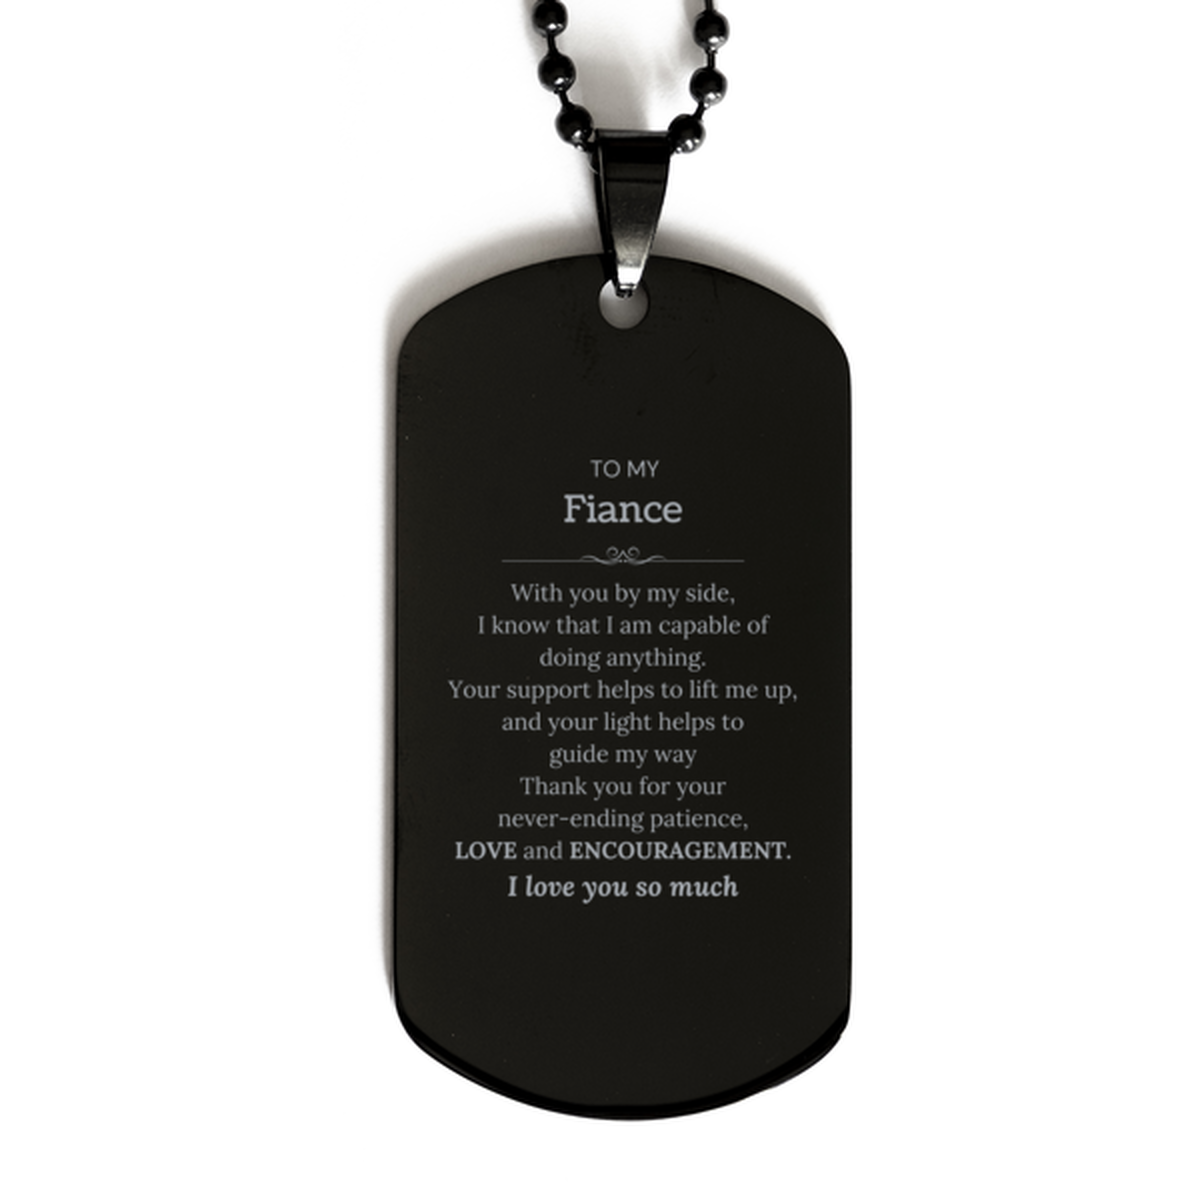 Appreciation Fiance Black Dog Tag Gifts, To My Fiance Birthday Christmas Wedding Keepsake Gifts for Fiance With you by my side, I know that I am capable of doing anything. I love you so much